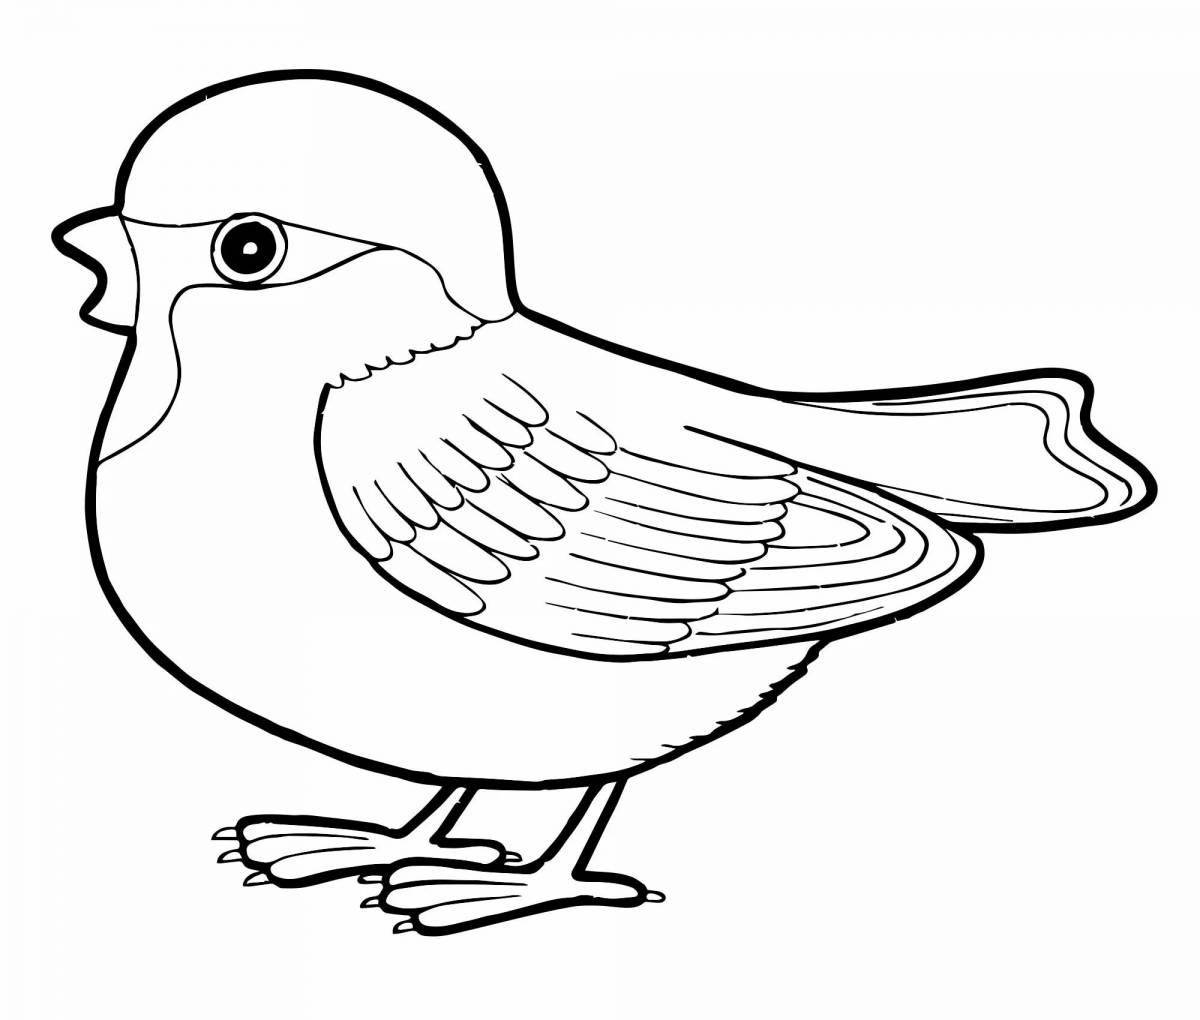 Playful bird coloring book for 2-3 year olds